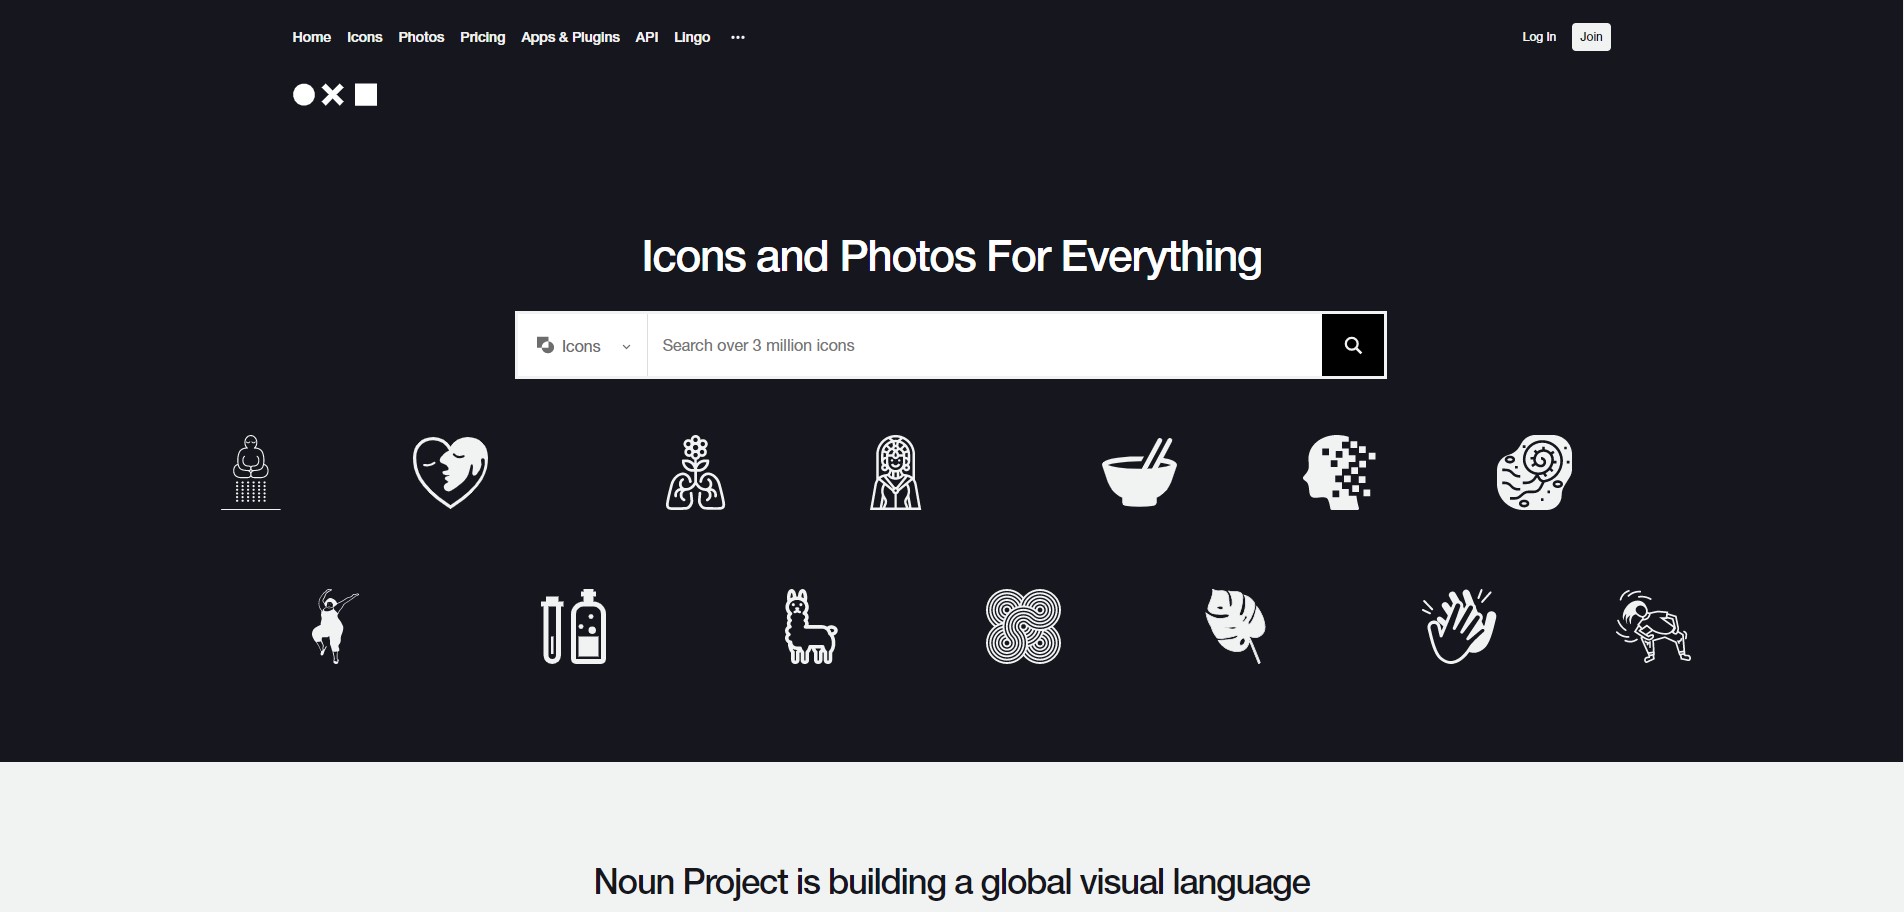 The Noun Project homepage